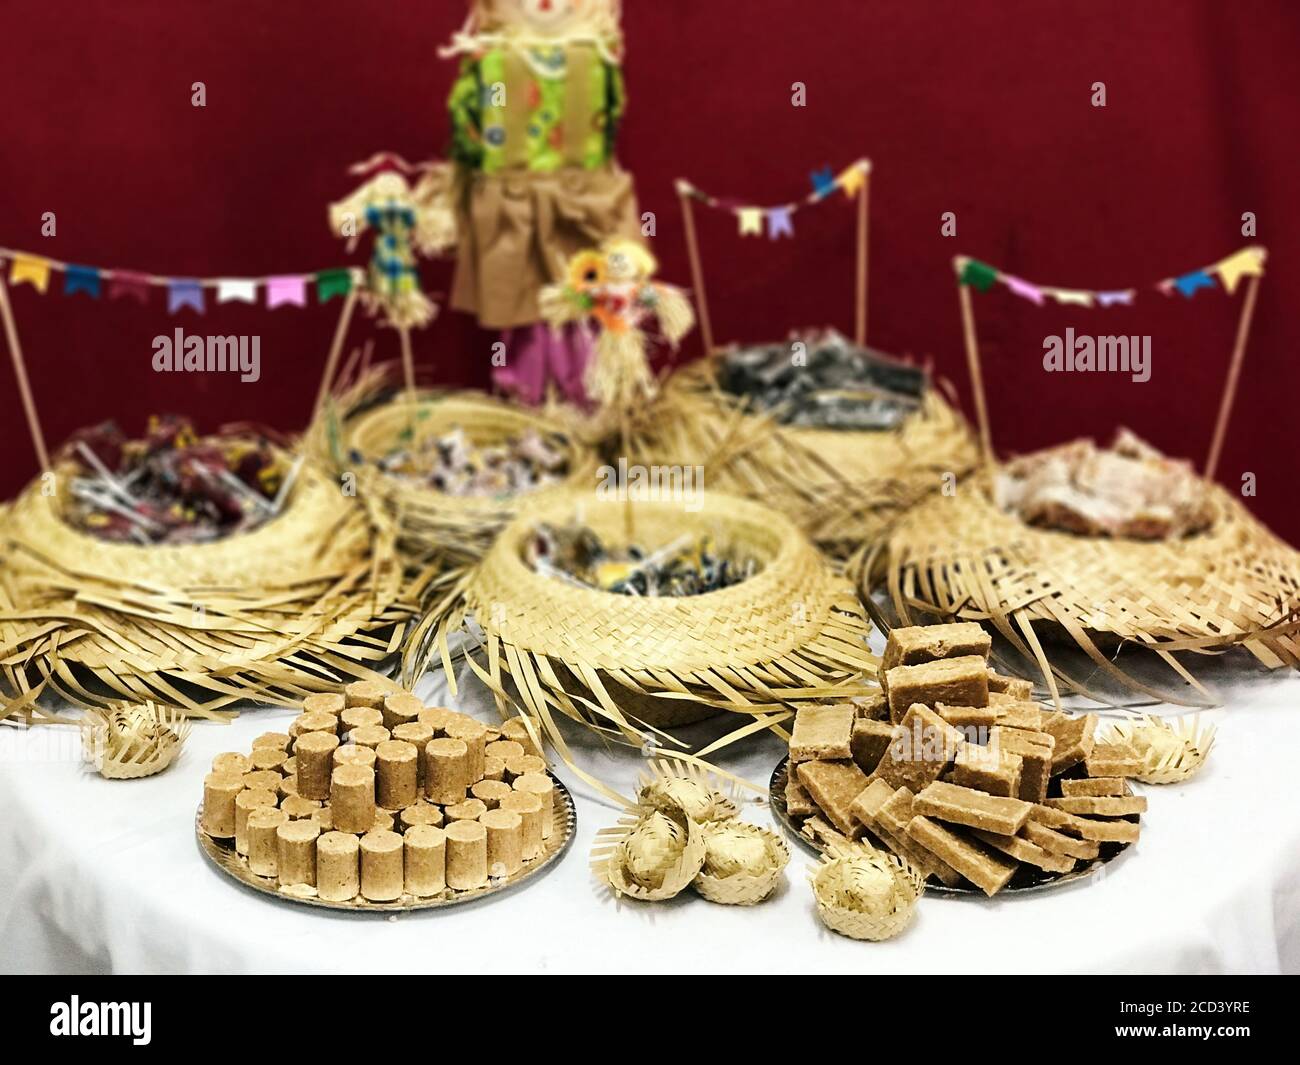 Table of typical food of junina party: paçoca candy, lollipops, cake, dulce de leche, peanut candy. Stock Photo